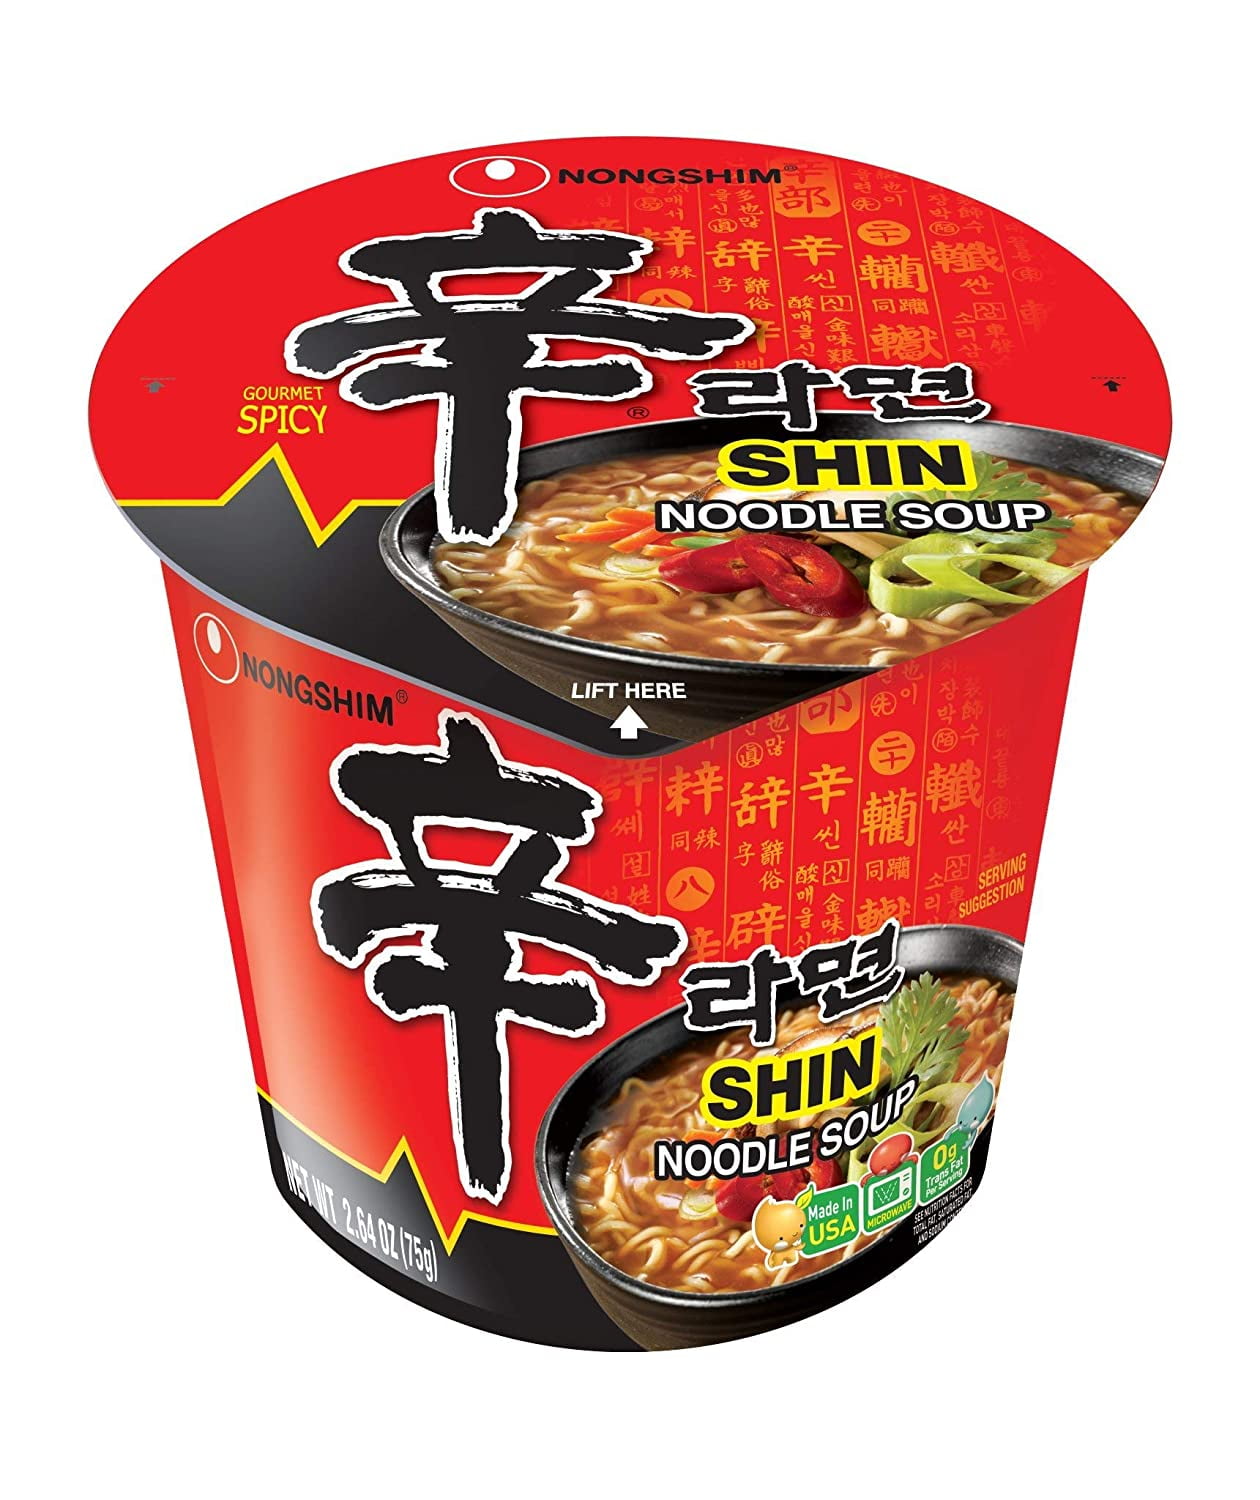 2 Pack] Nongshim Shin Cup Noodle Soup, Gourmet Spicy, 6 - 2.64 Ounce (Total  12 Count) 